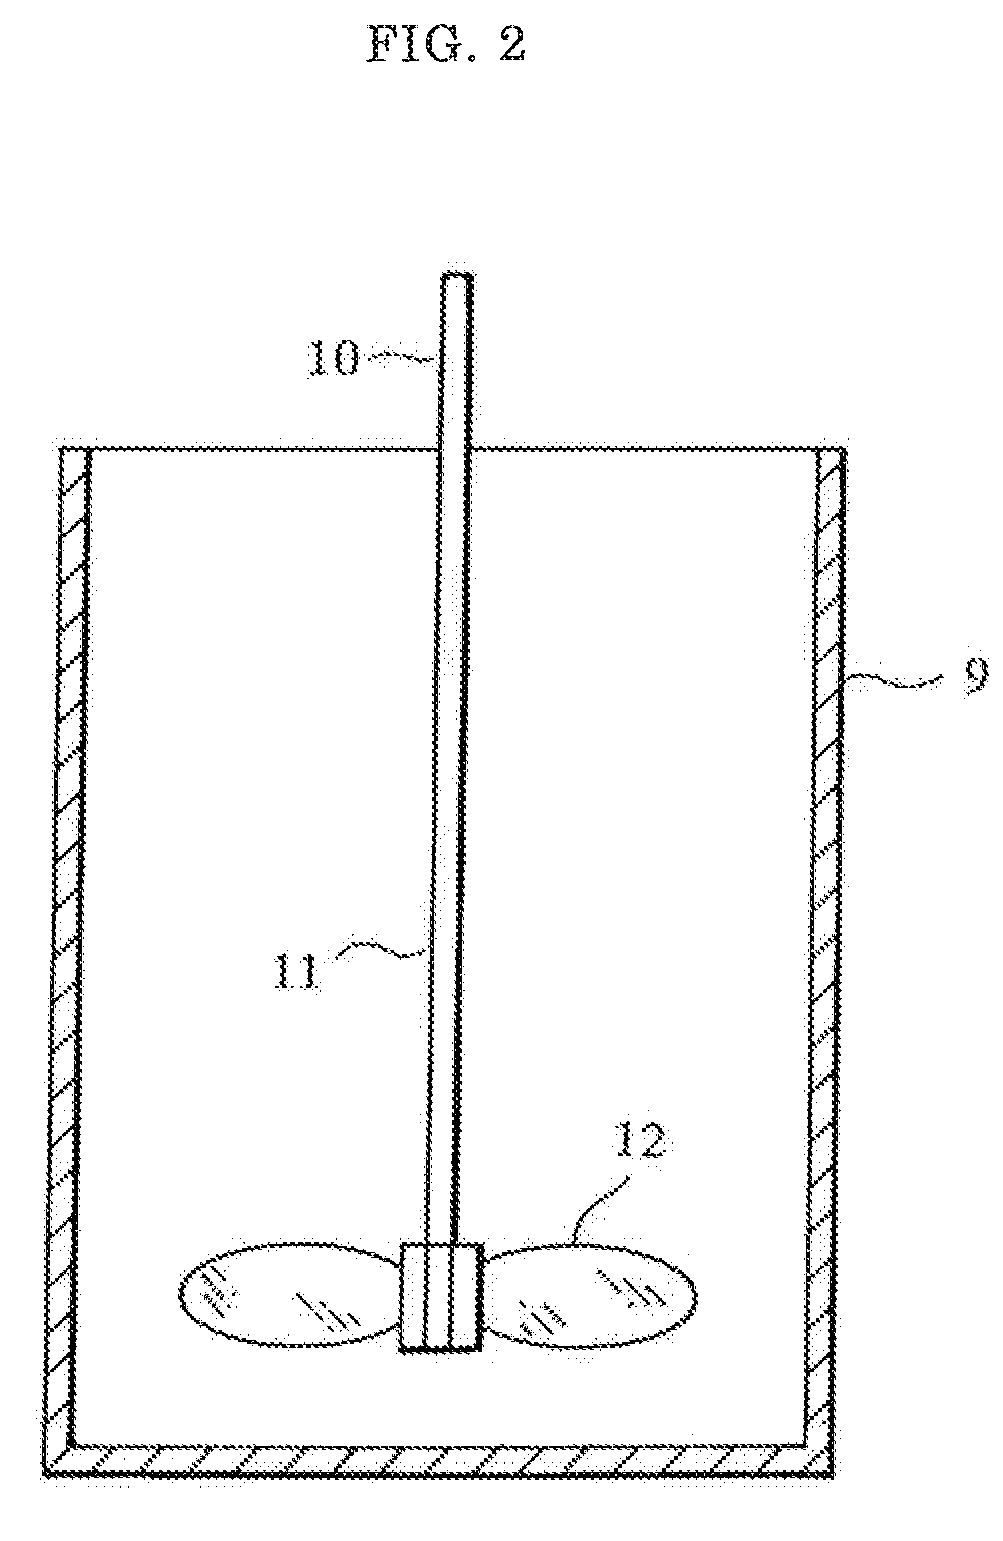 Catalyst and method for thermal decomposition of organic substance and method for producing such catalyst